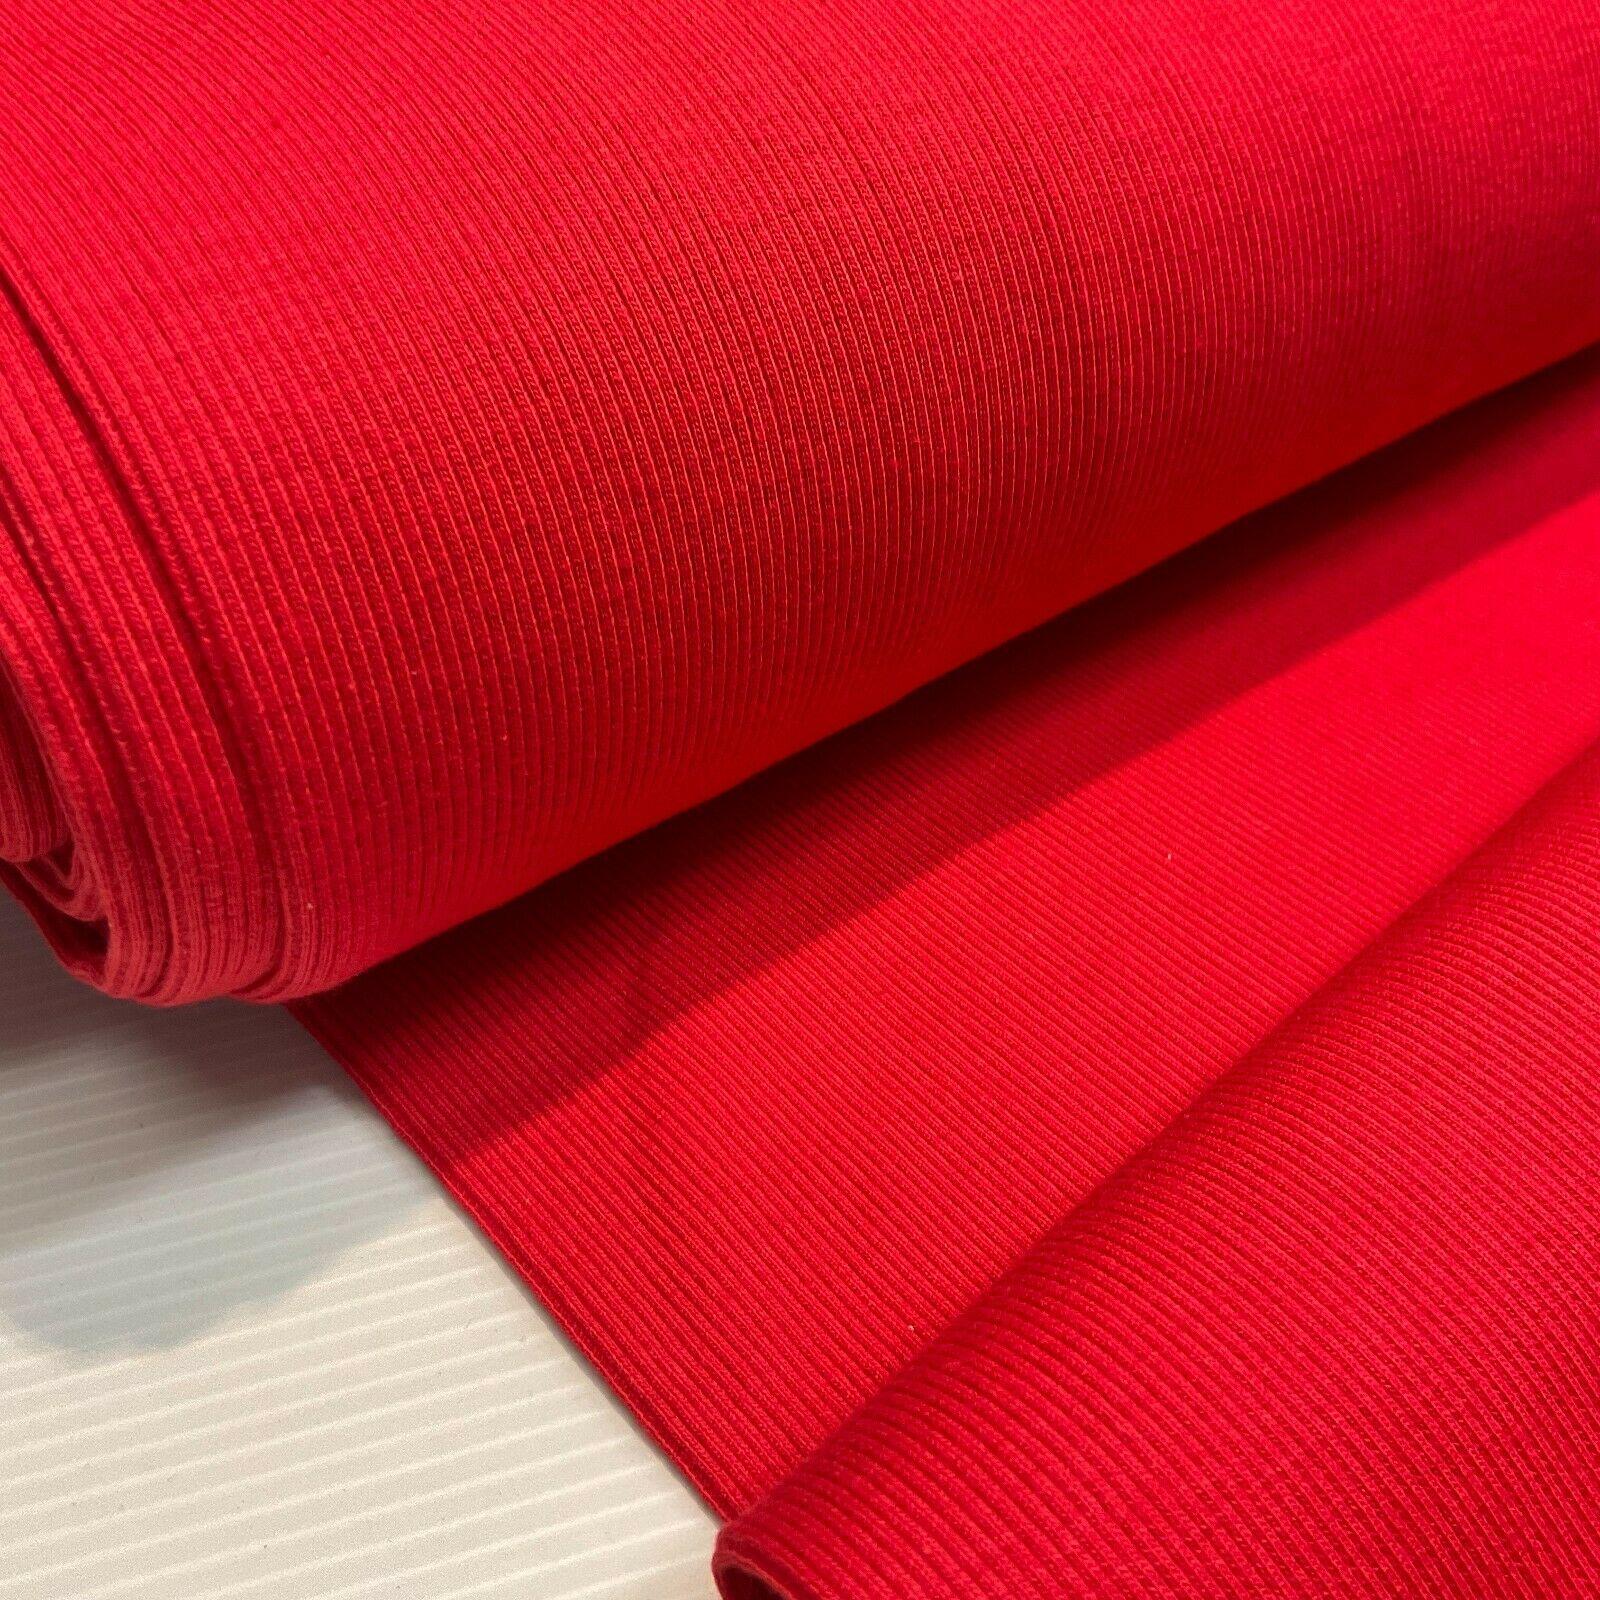 Plain Tubular Ribbing Stretch Jersey Fabric ideal for tops t-shirts 27cm M1588